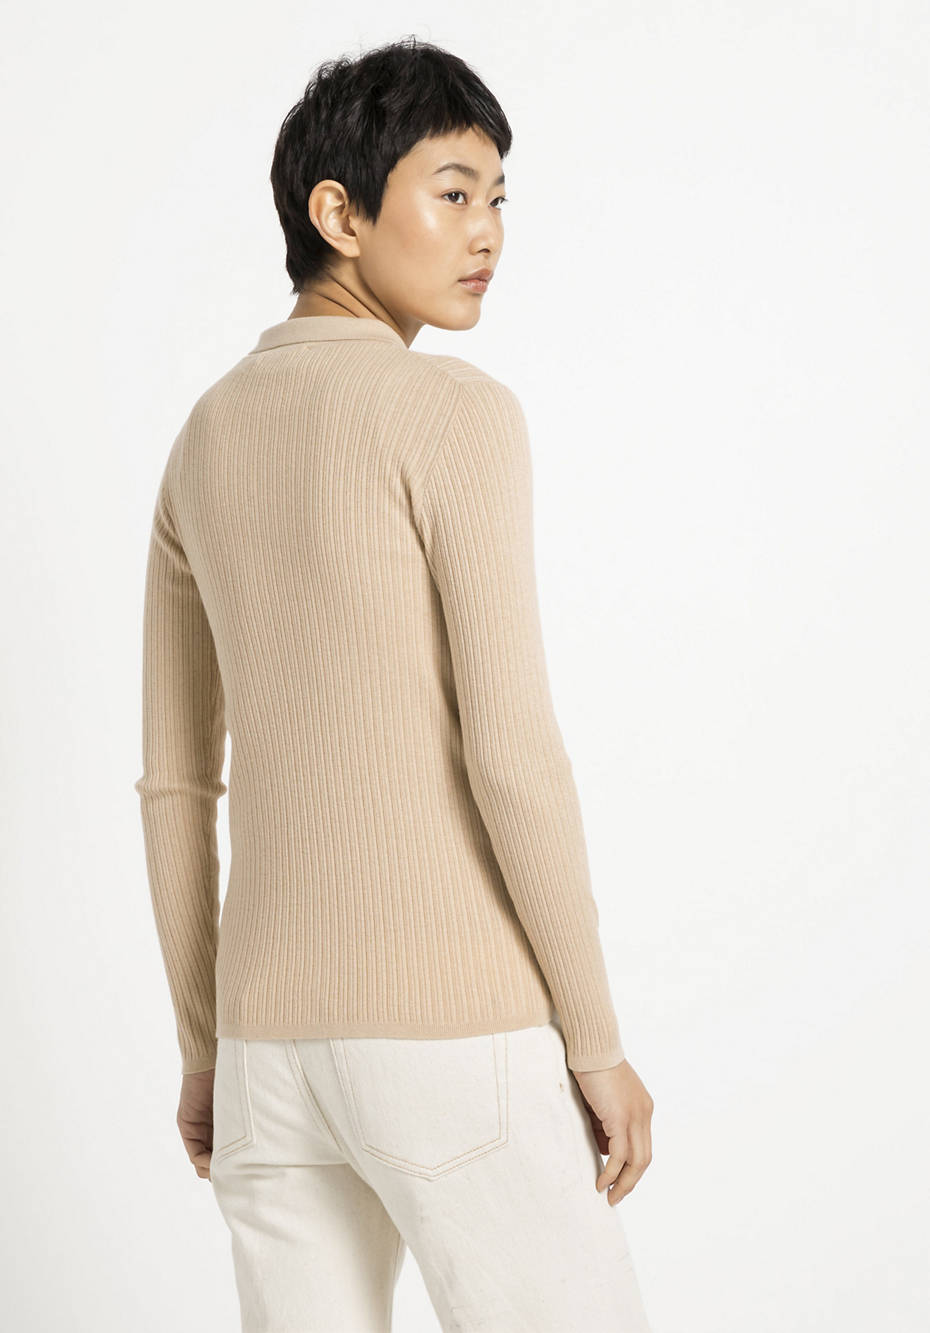 Limited by Nature cardigan made of silk with cotton